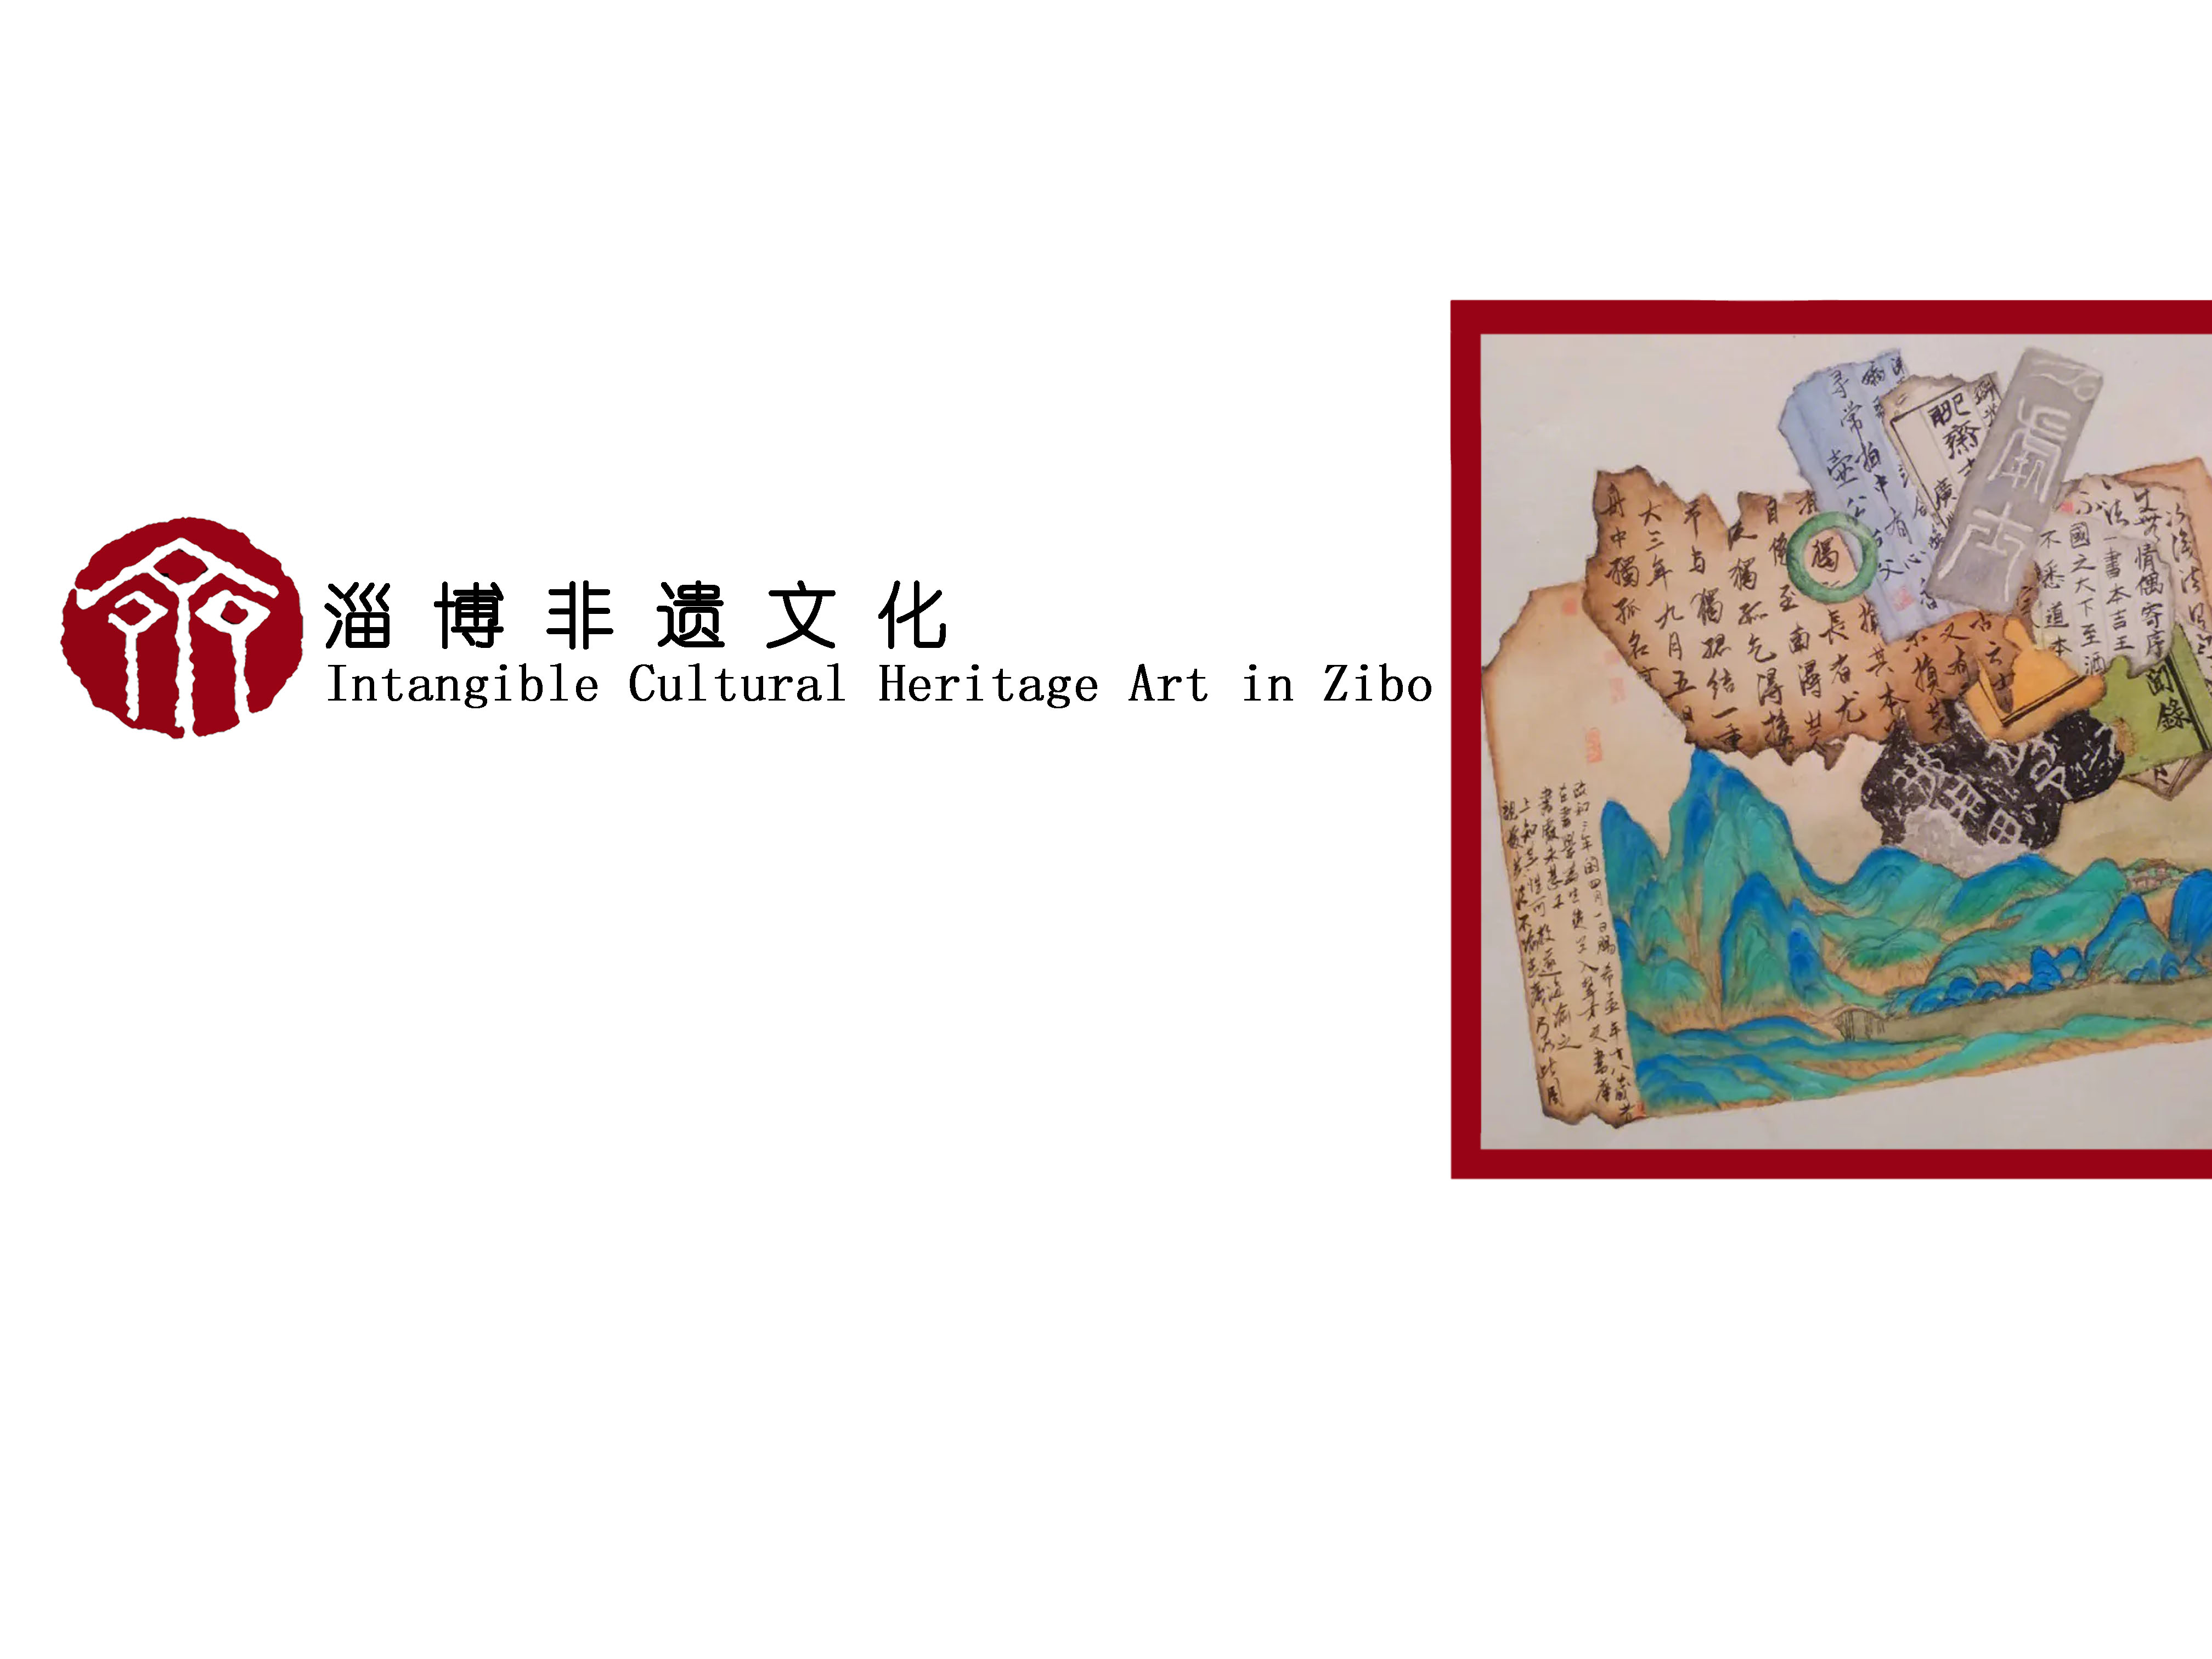 Intangible Cultural Heritage Art in Zibo